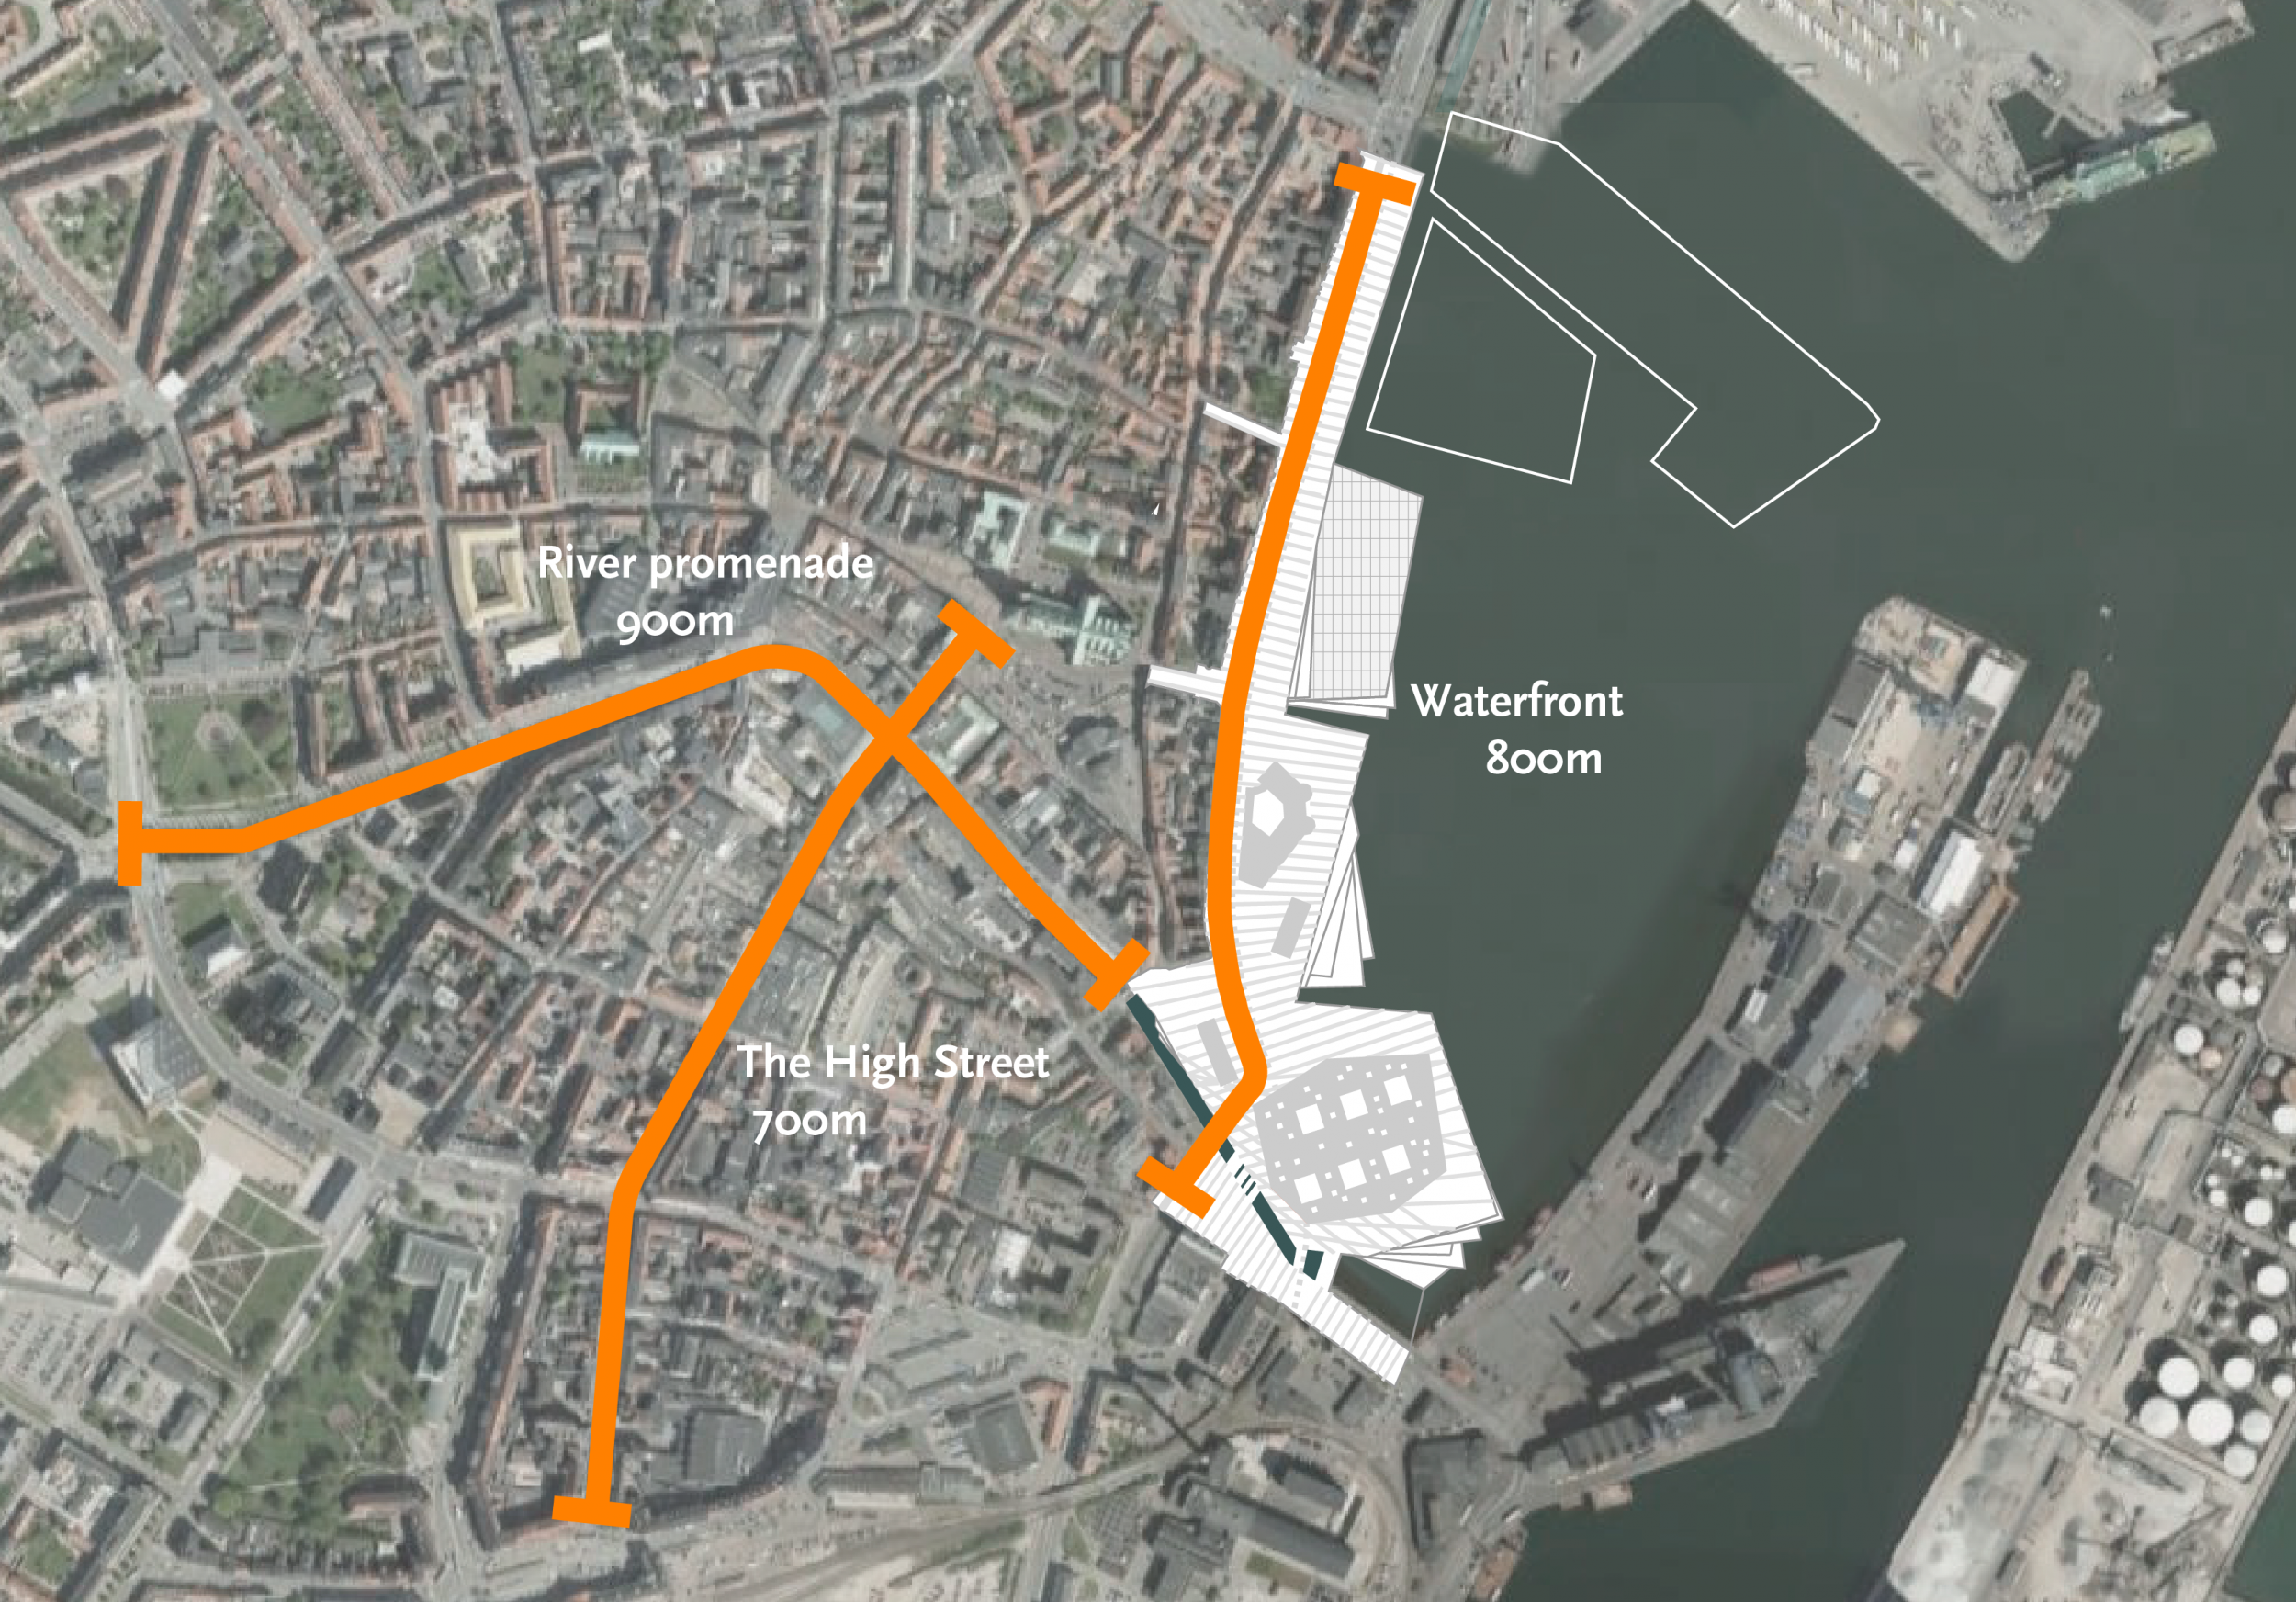 Length of the waterfront spaces compared to other stretches in Aarhus